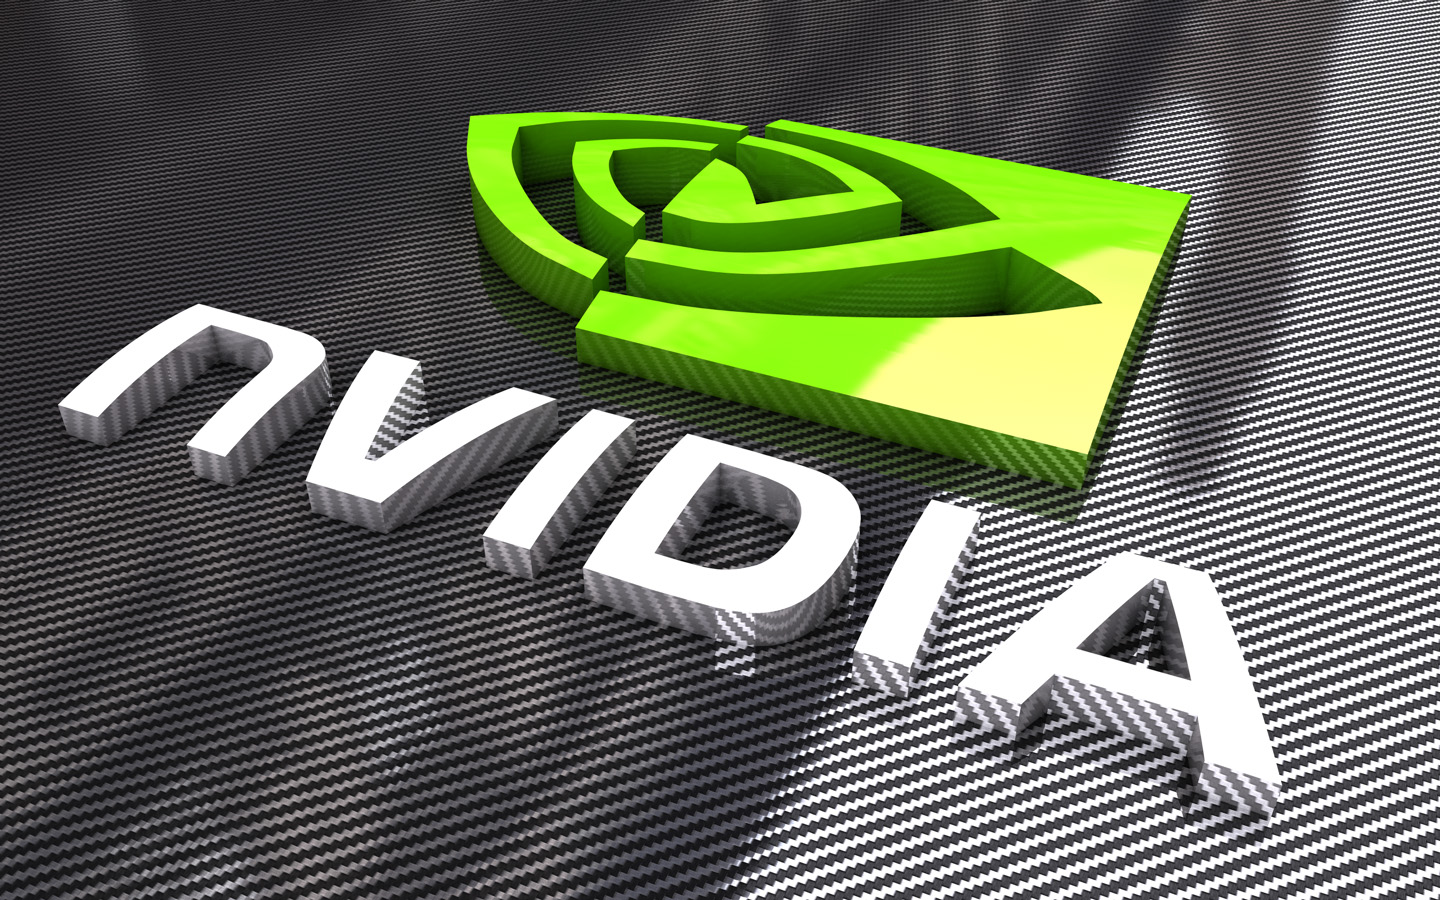 Nice Images Collection: Nvidia Desktop Wallpapers